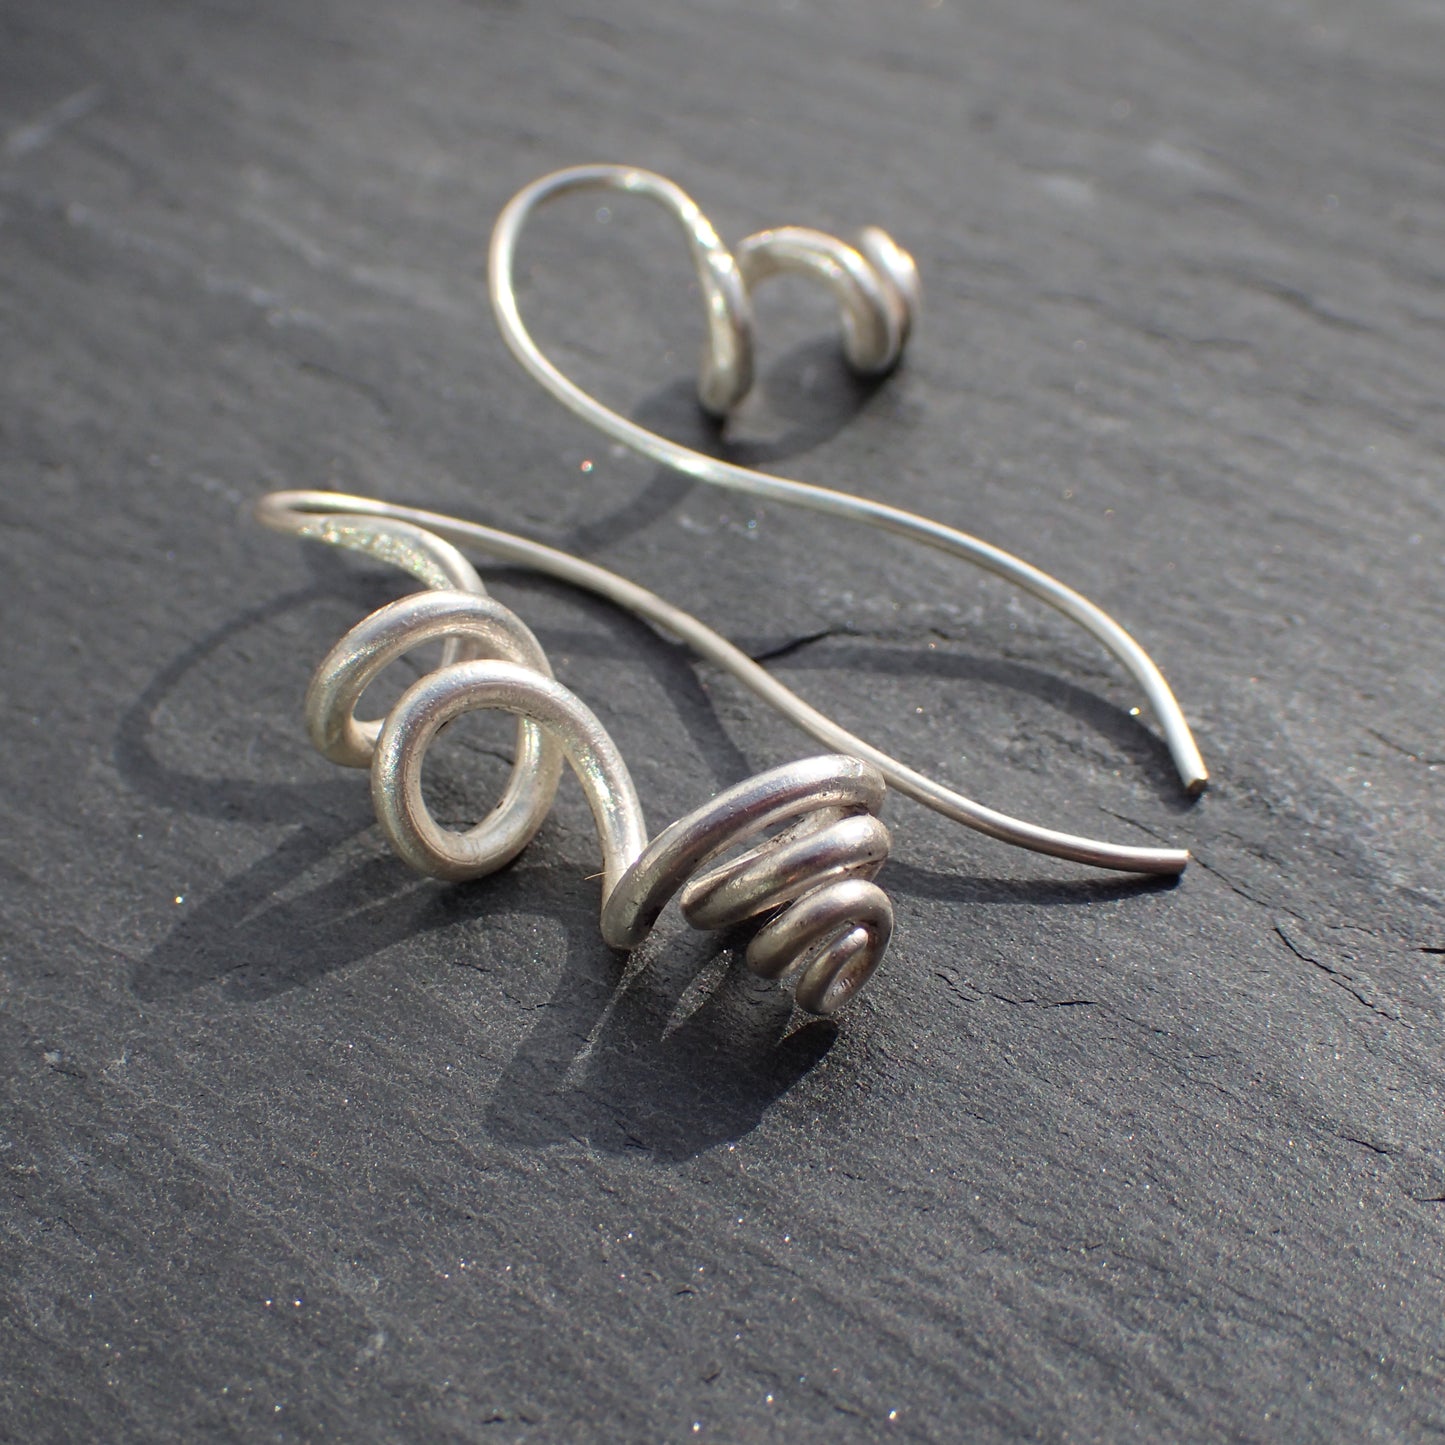 Silver tendril earrings, unique & handmade.-Jewellery-Beca Beeby